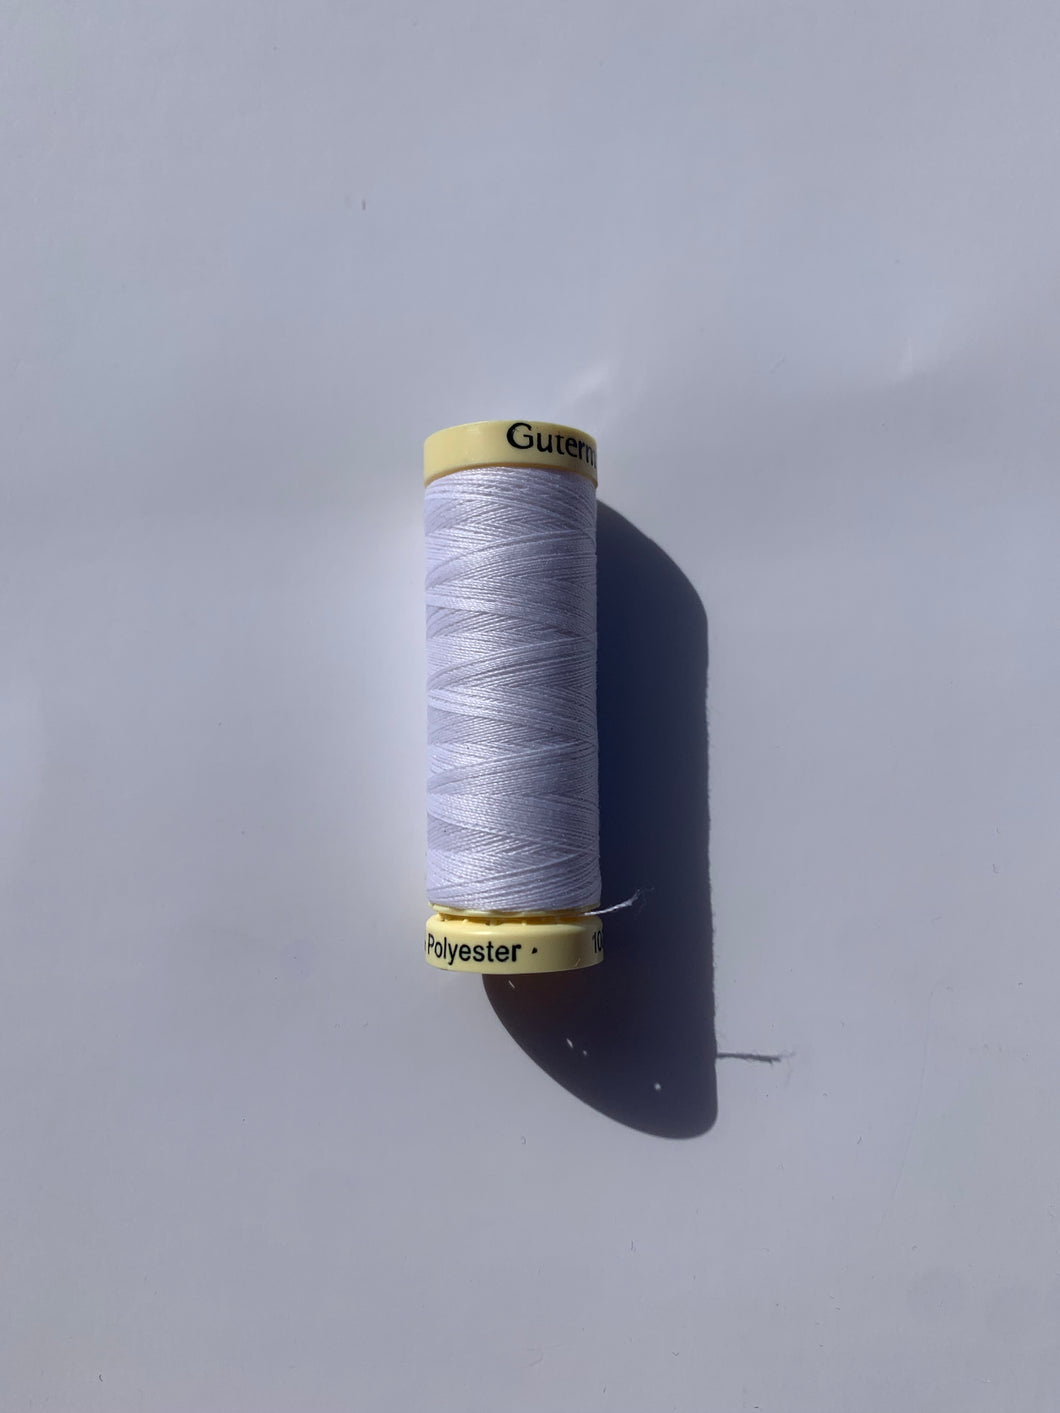 Gutterman thread sew all polyester White col 800